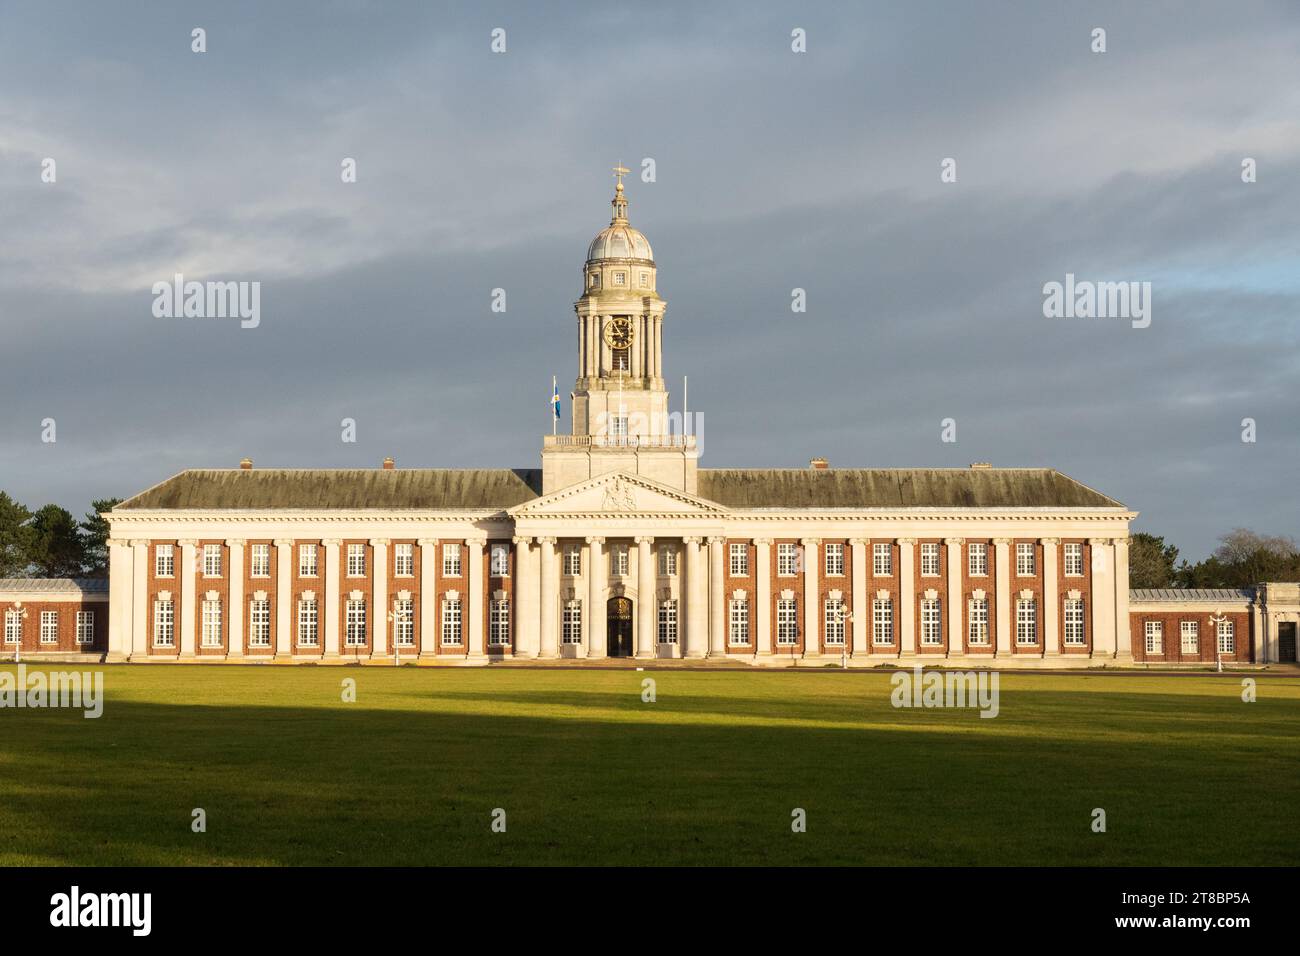 Mess des officiers du College Hall, CHOM, RAFC Cranwell. Sleaford, Lincolnshire, Angleterre. Banque D'Images